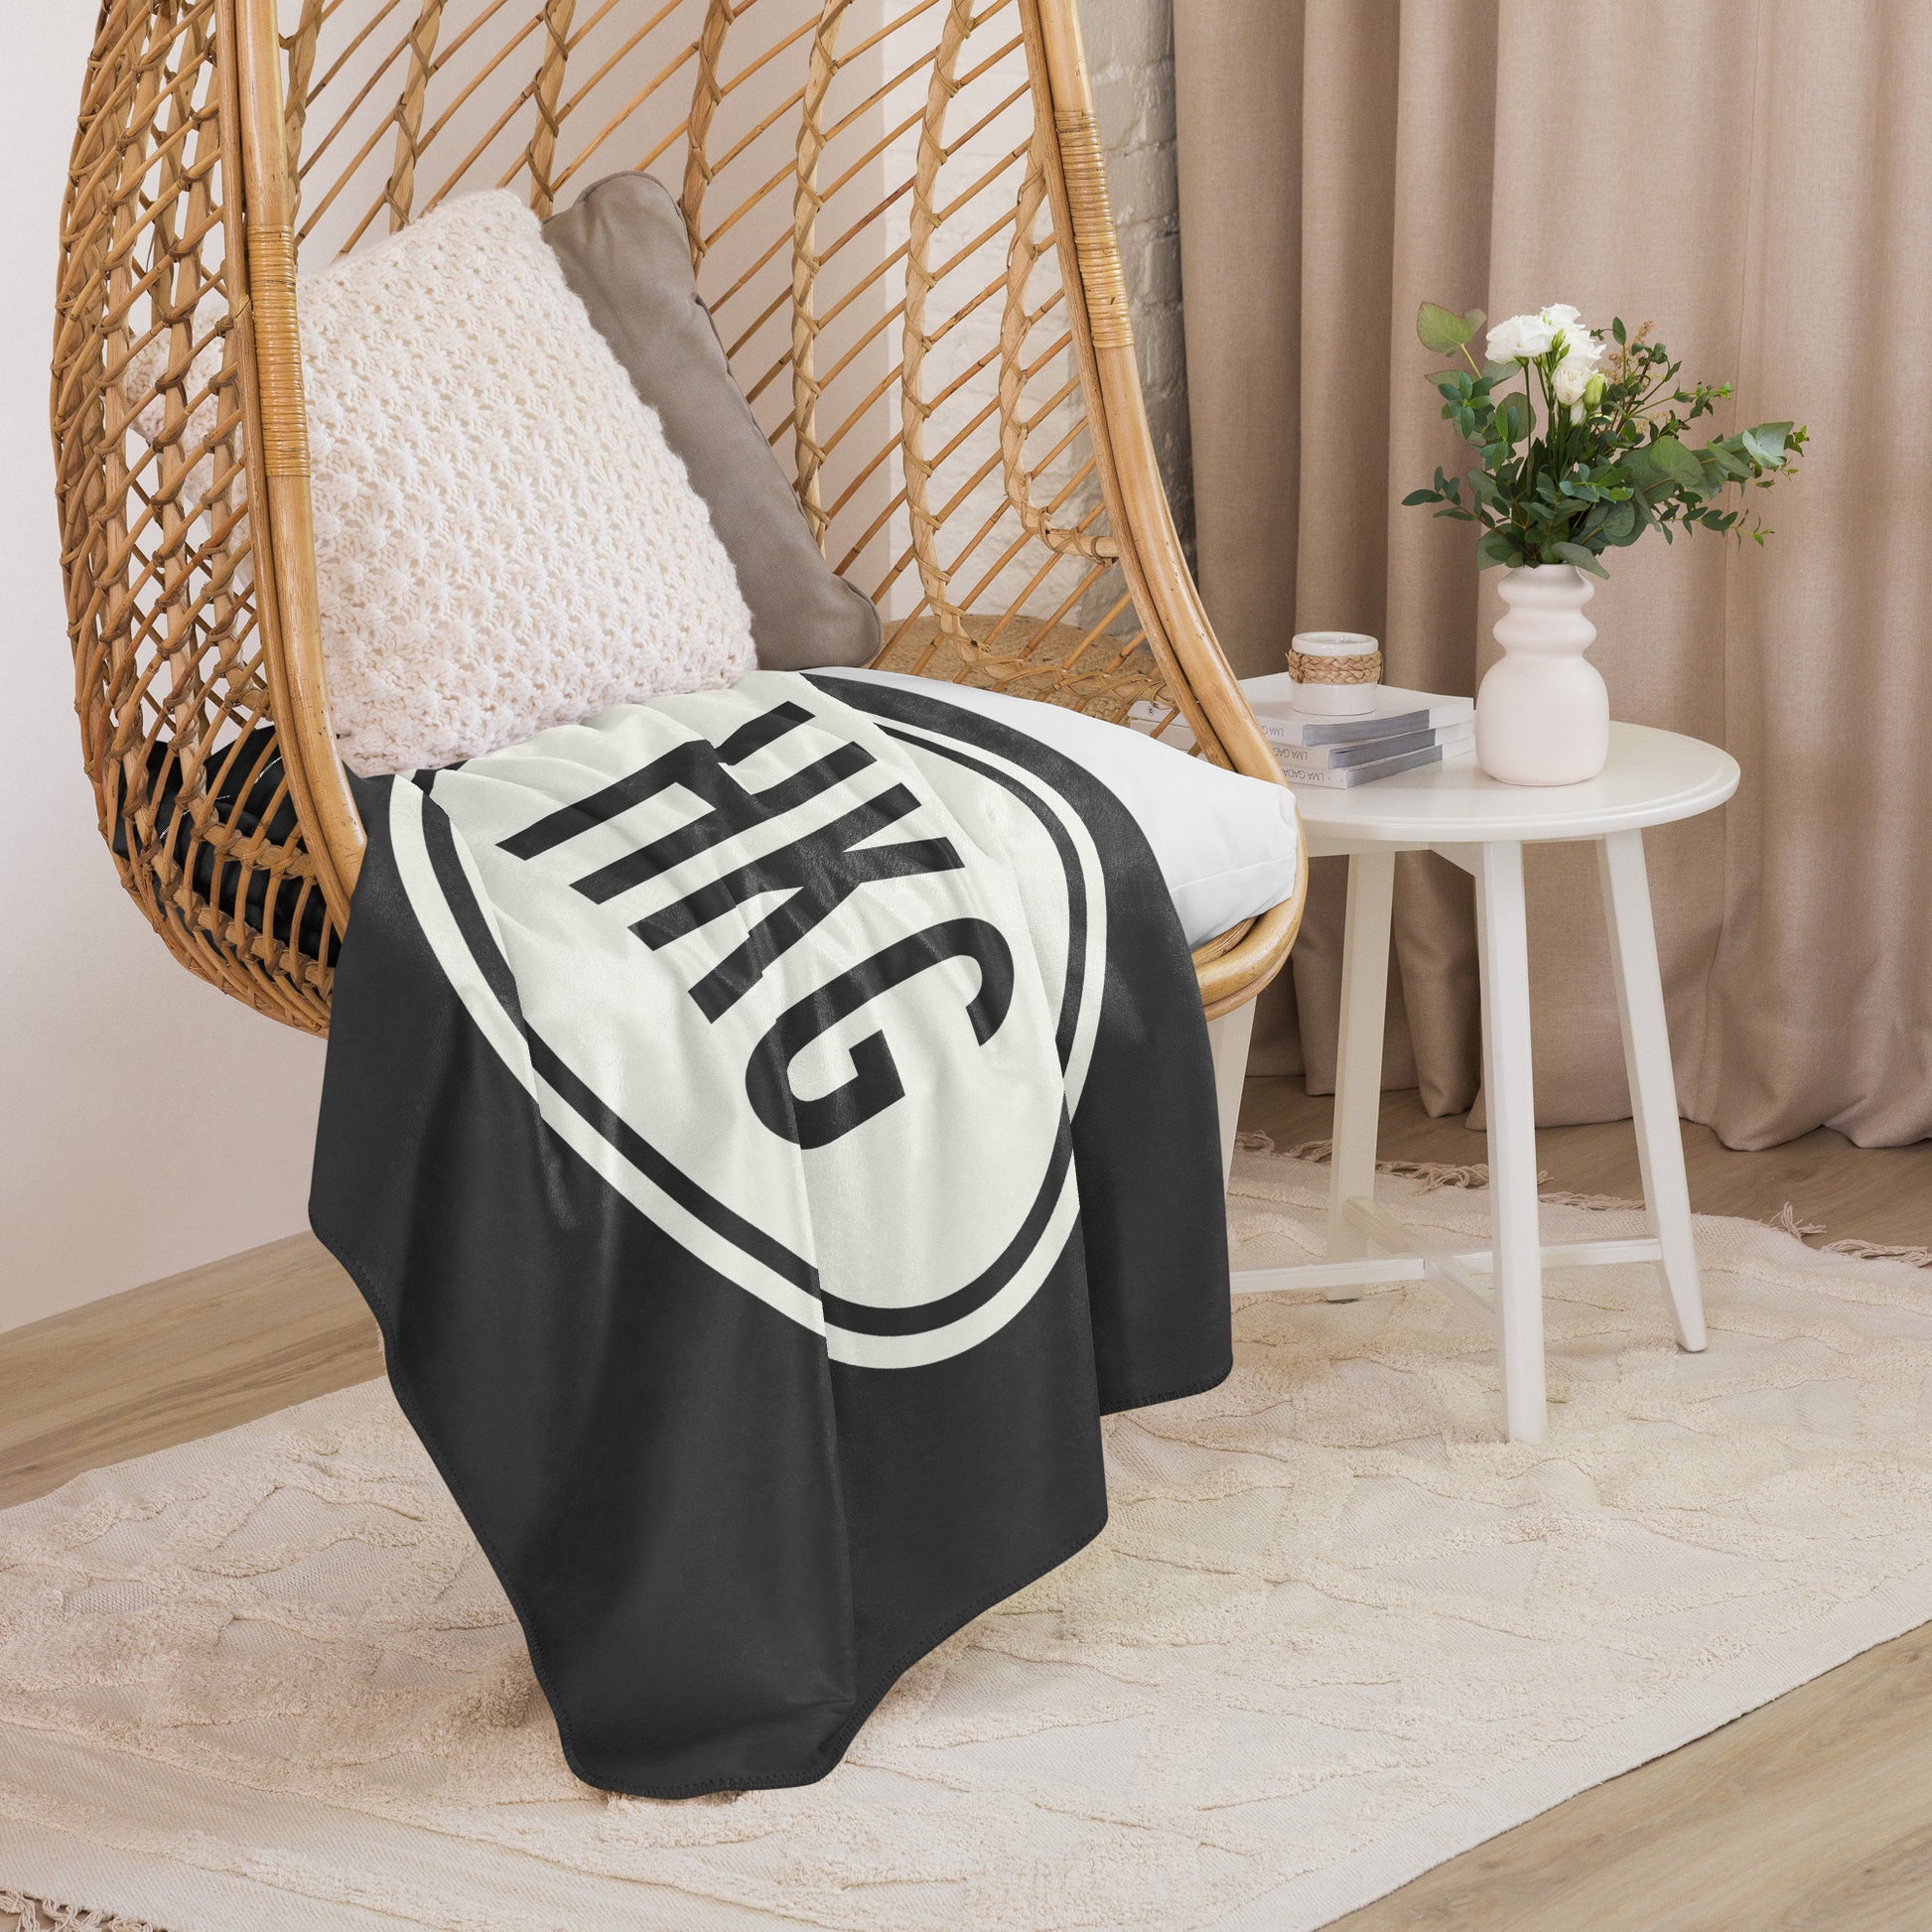 Unique Travel Gift Sherpa Blanket - White Oval • HKG Hong Kong • YHM Designs - Image 06